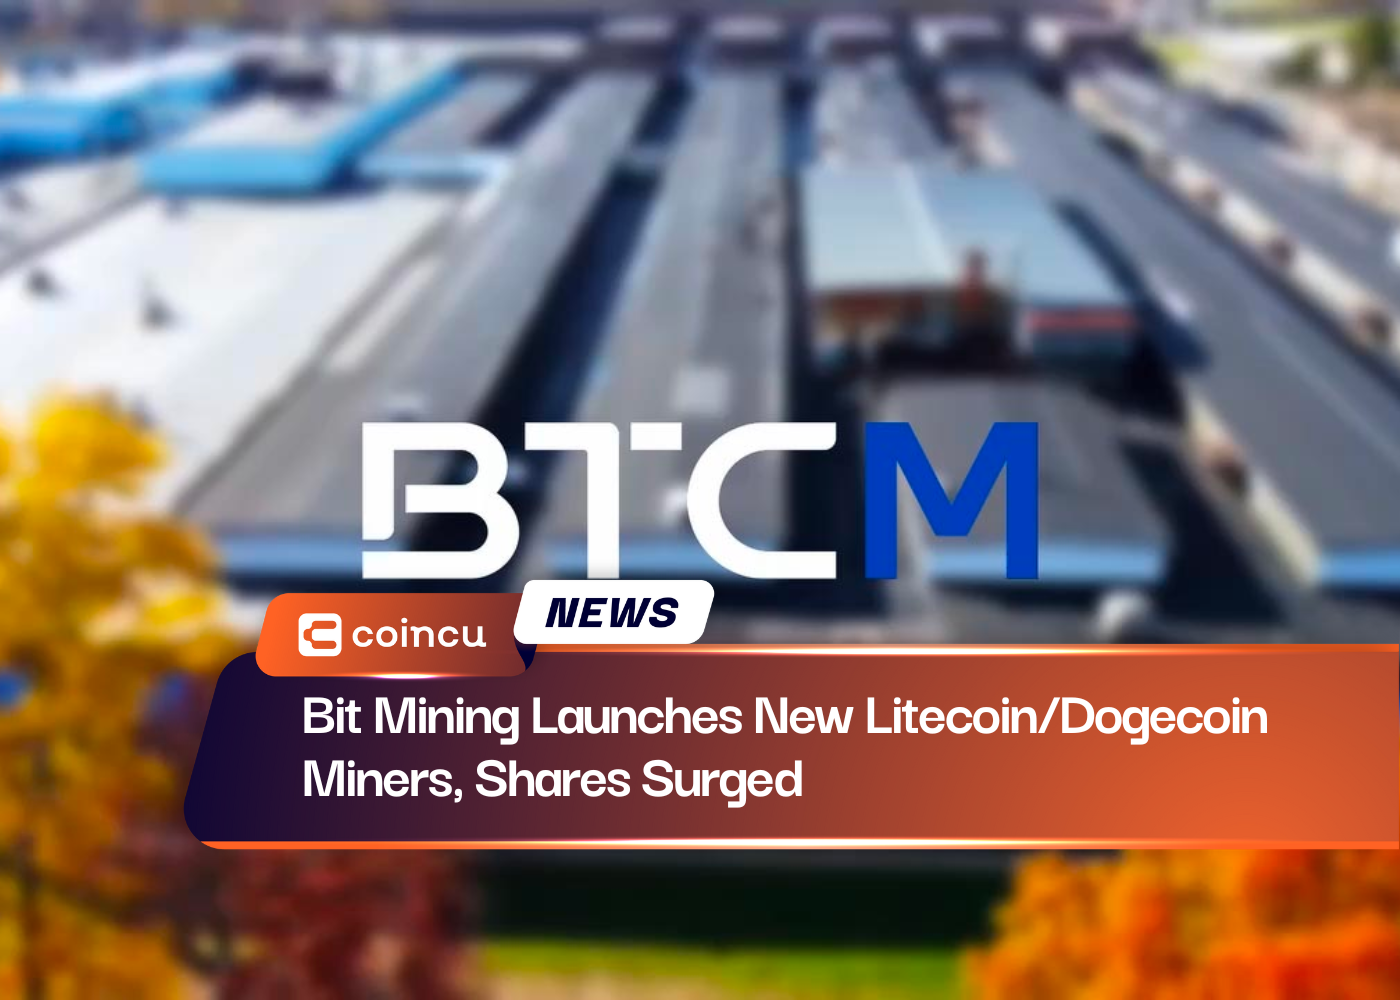 Bit Mining Launches New Litecoin/Dogecoin Miners, Shares Surged